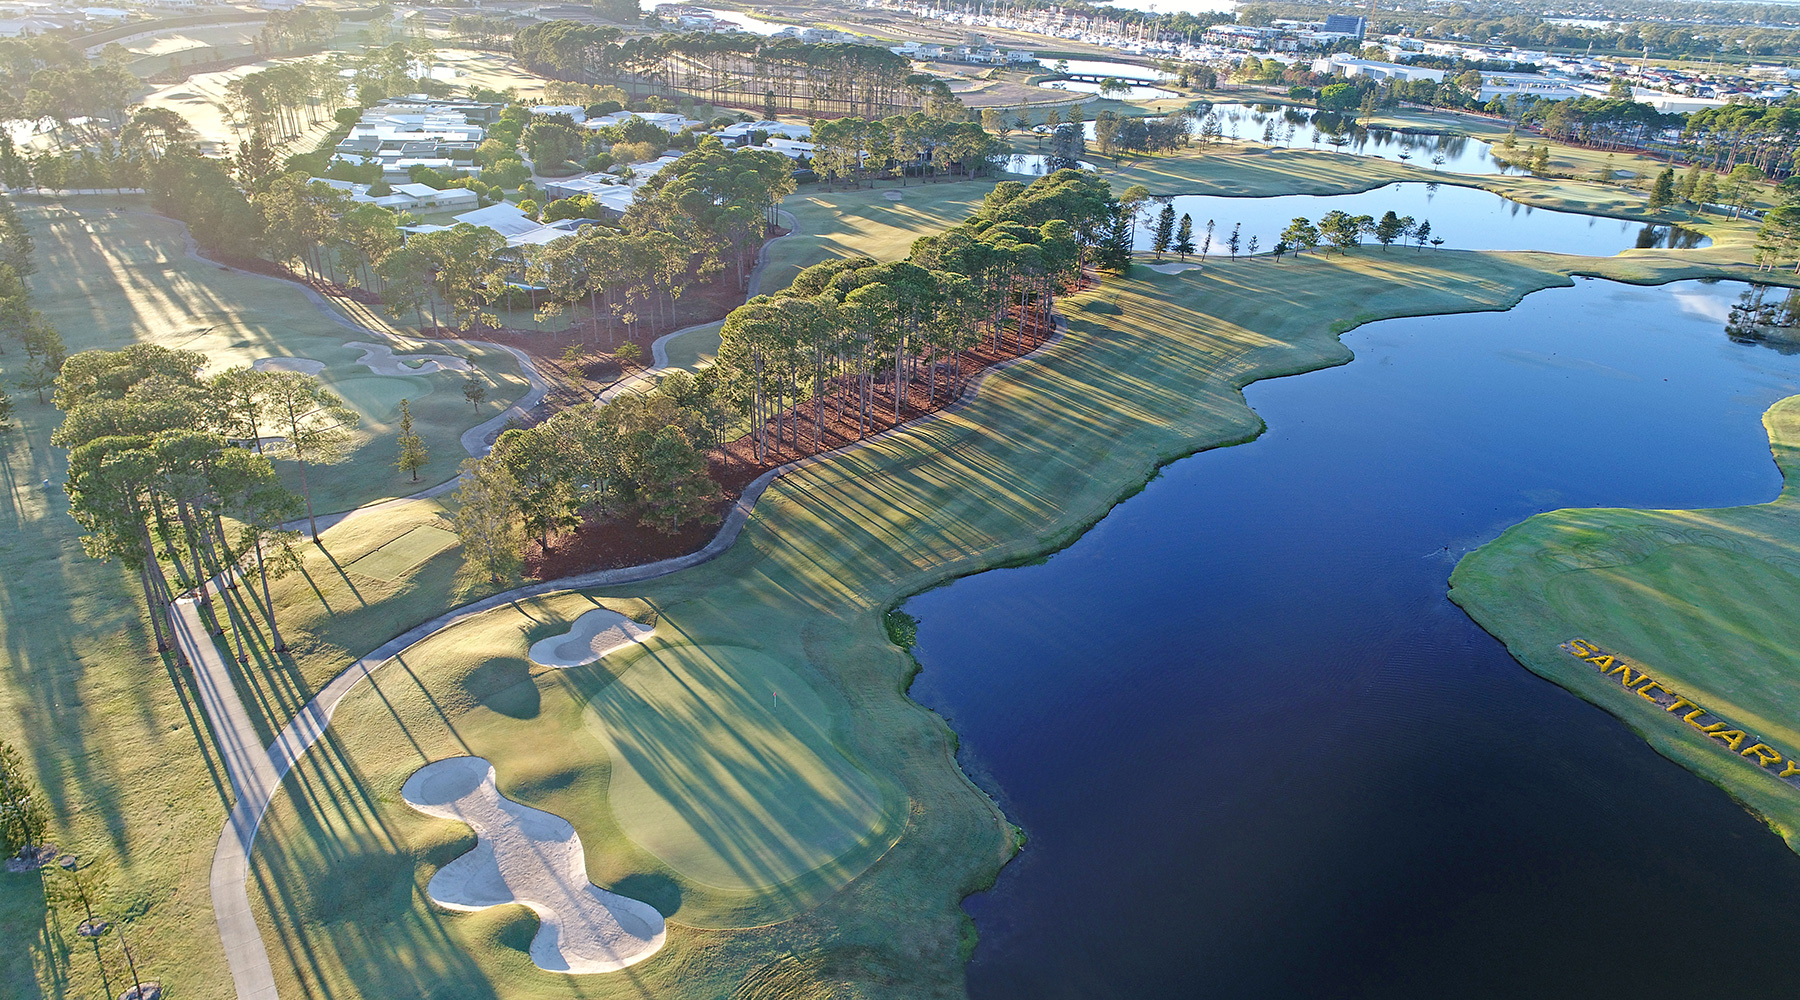 Sanctuary Cove offers 36 holes spanning both ends of the accessibility spectrum.